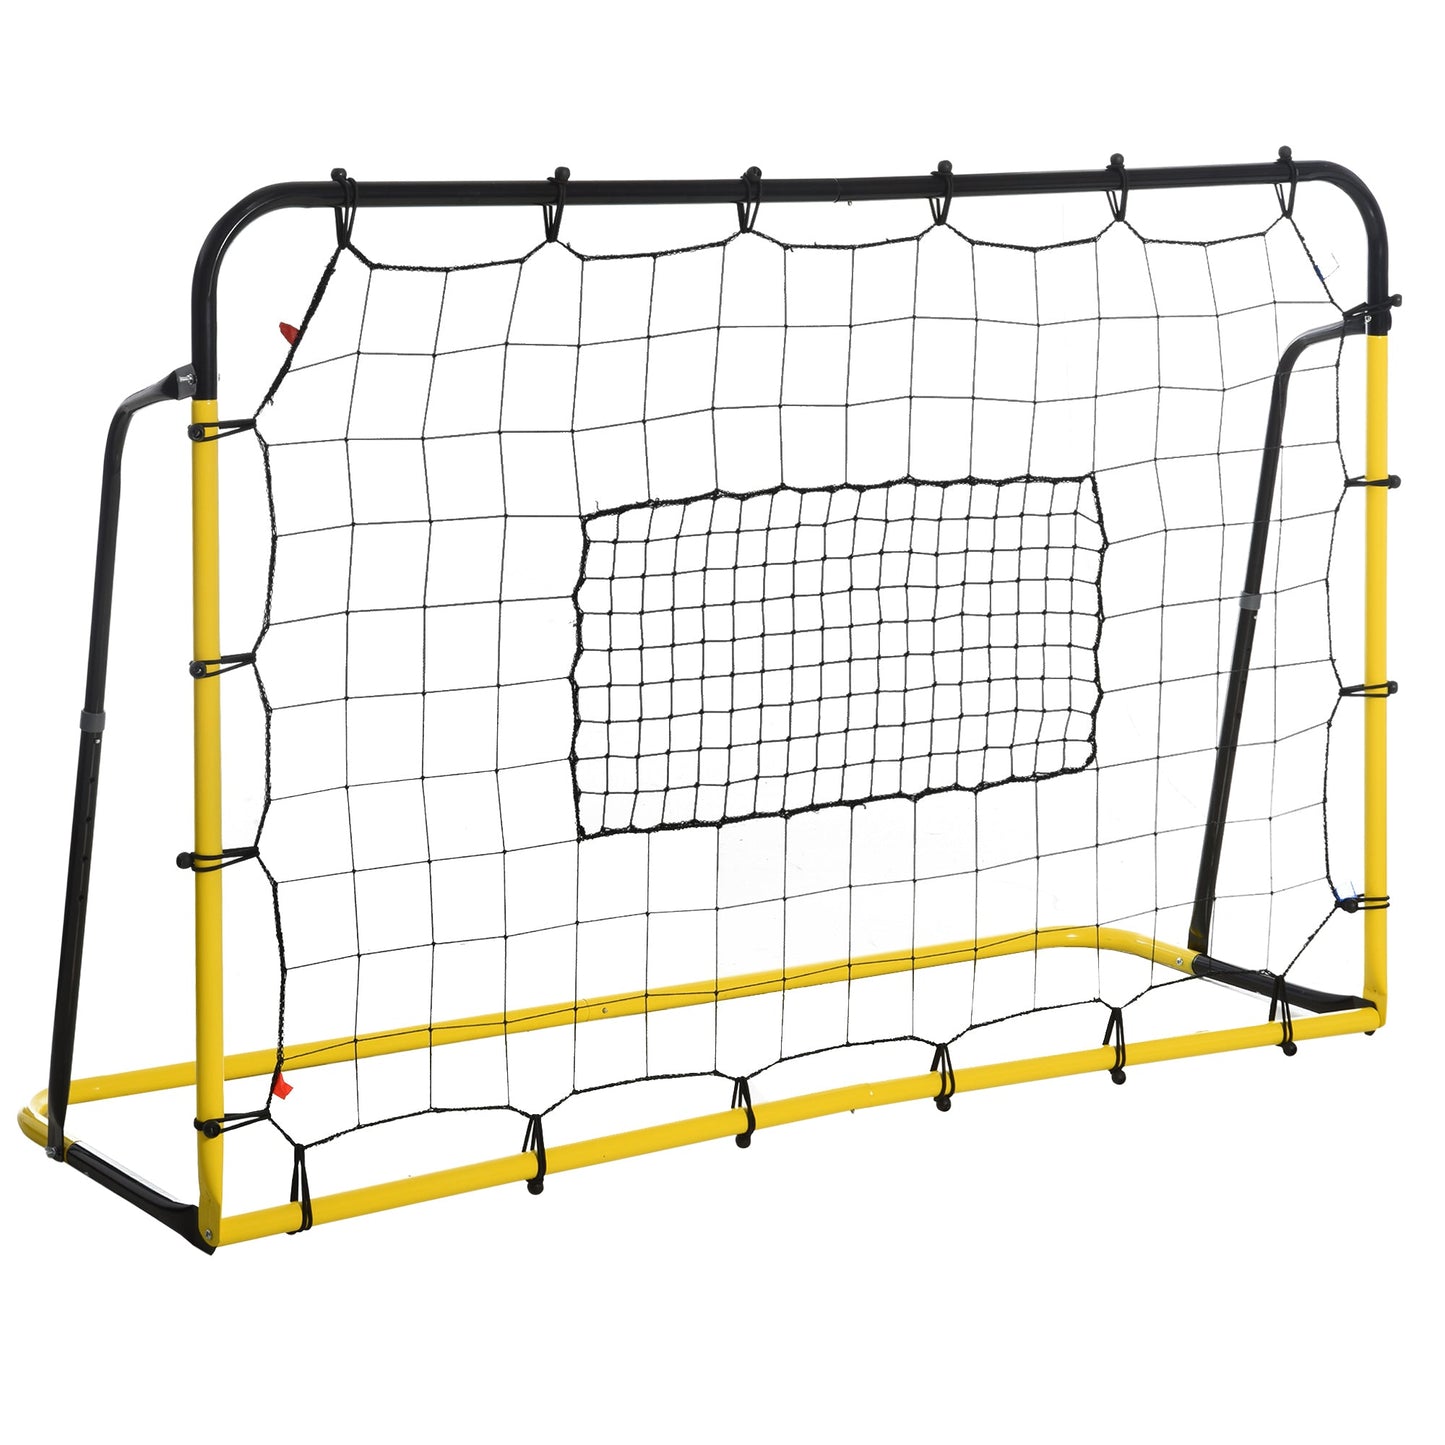 6 x 4 ft Rebound Net Soccer Goal with 5 Angle Adjustable for Soccer Baseball Basketball Training at Gallery Canada